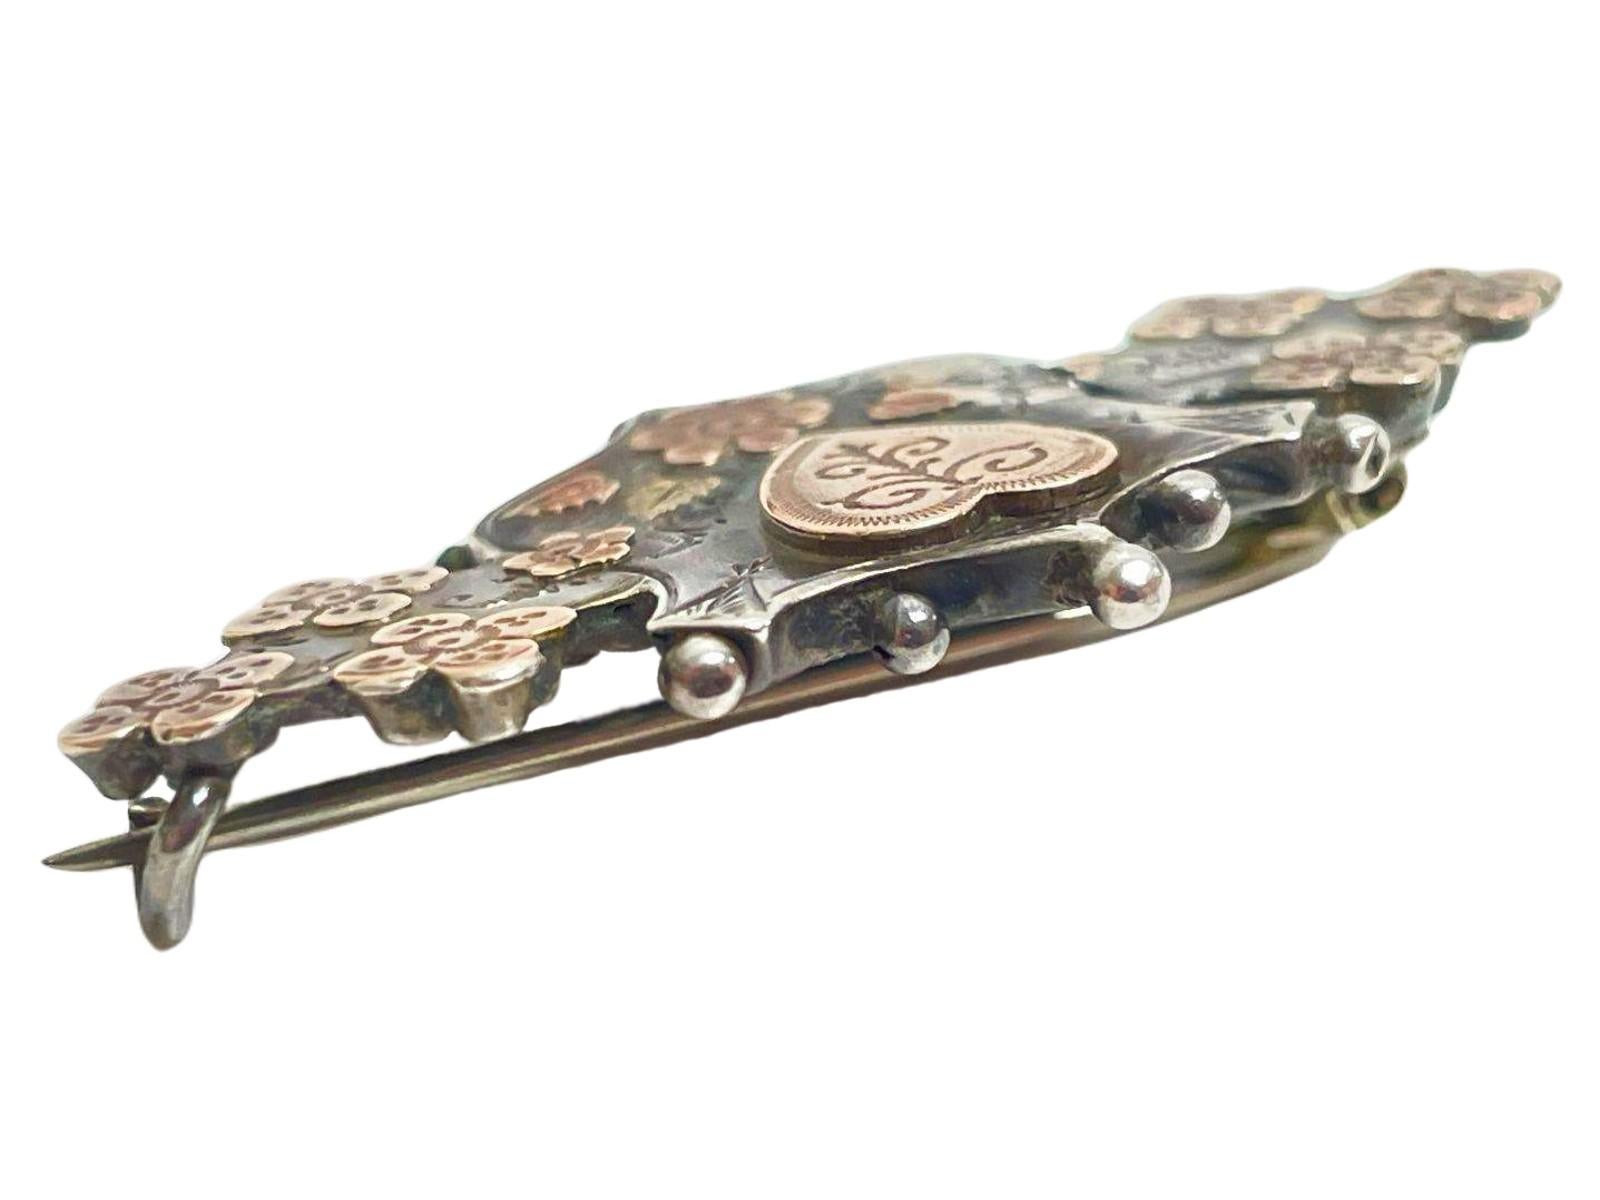 This exquisite, one-of-a-kind antique love token brooch is a stunning example of 19th-century romantic jewelry. This is a wonderful piece dating to 1894, crafted from sterling silver overlaid with yellow gold and rose gold. It features unique